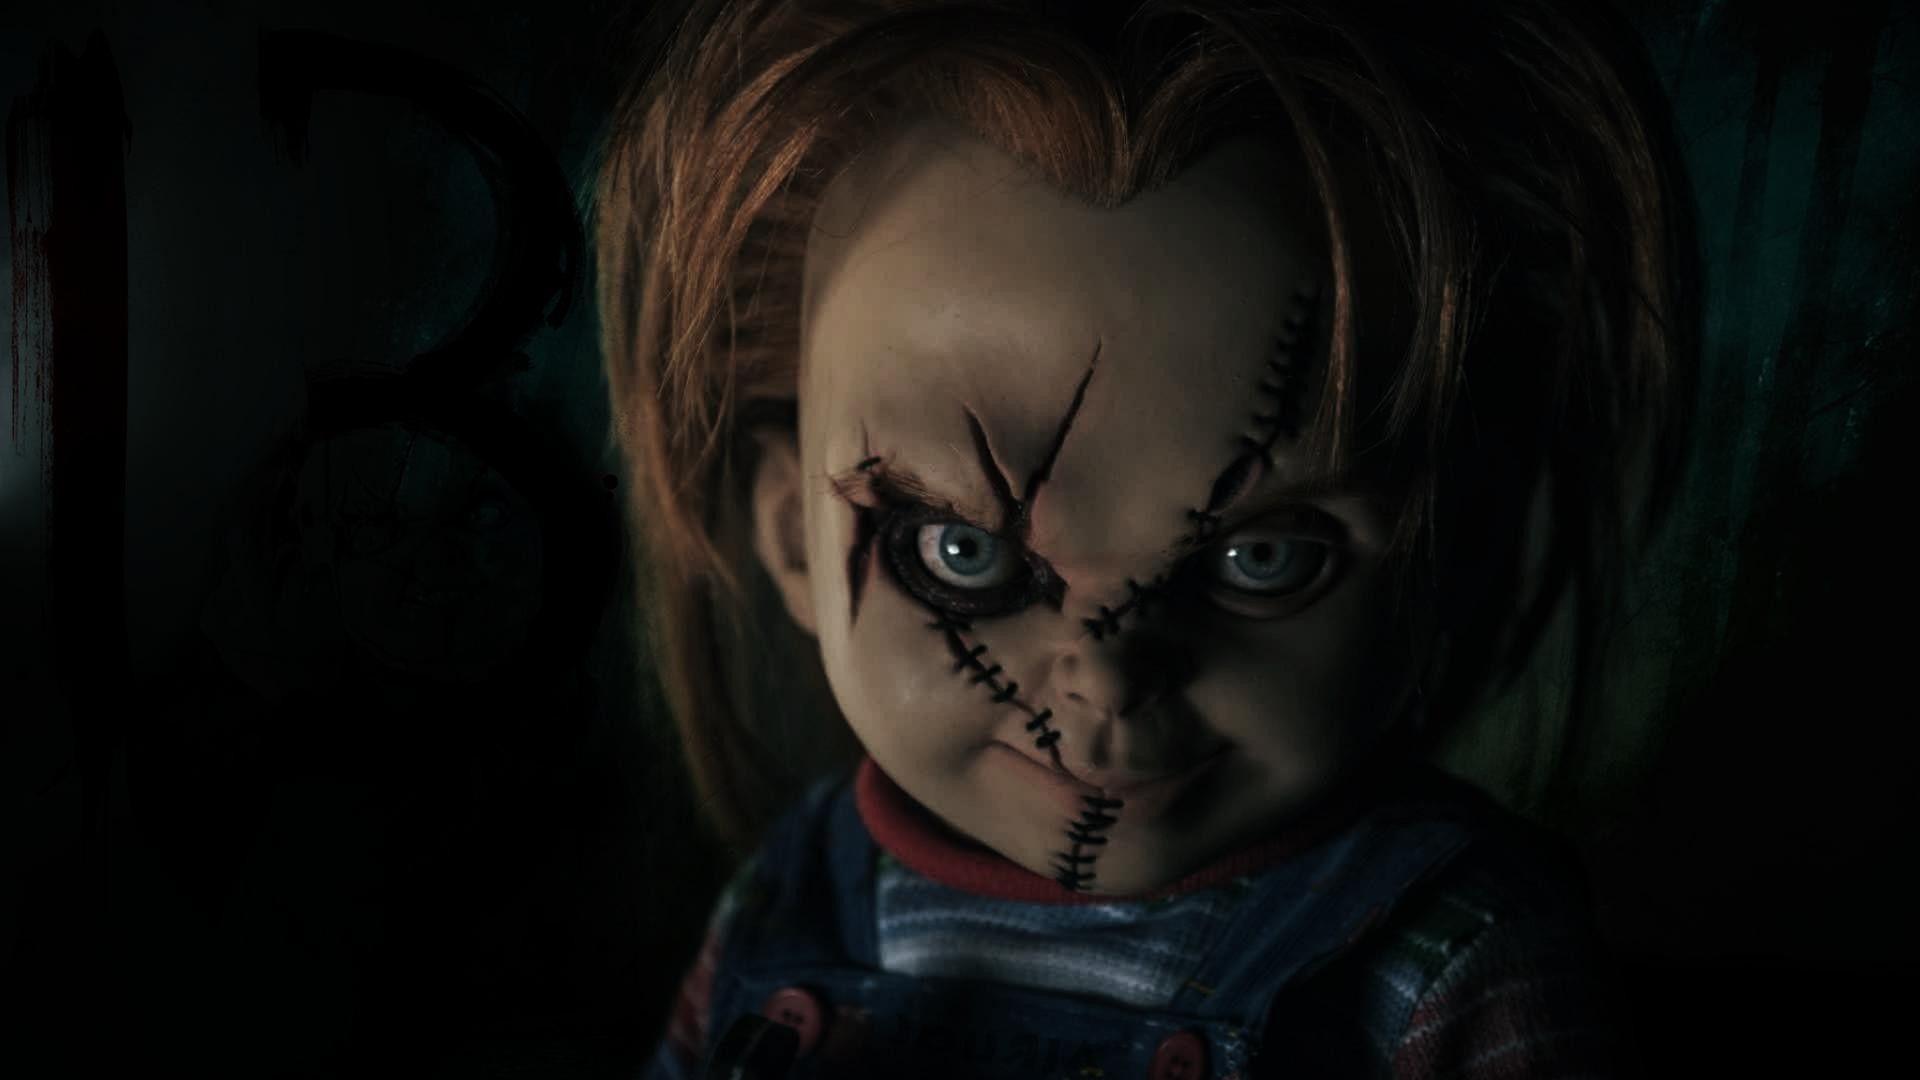 image For > Chucky Doll Wallpaper. THING in 2019